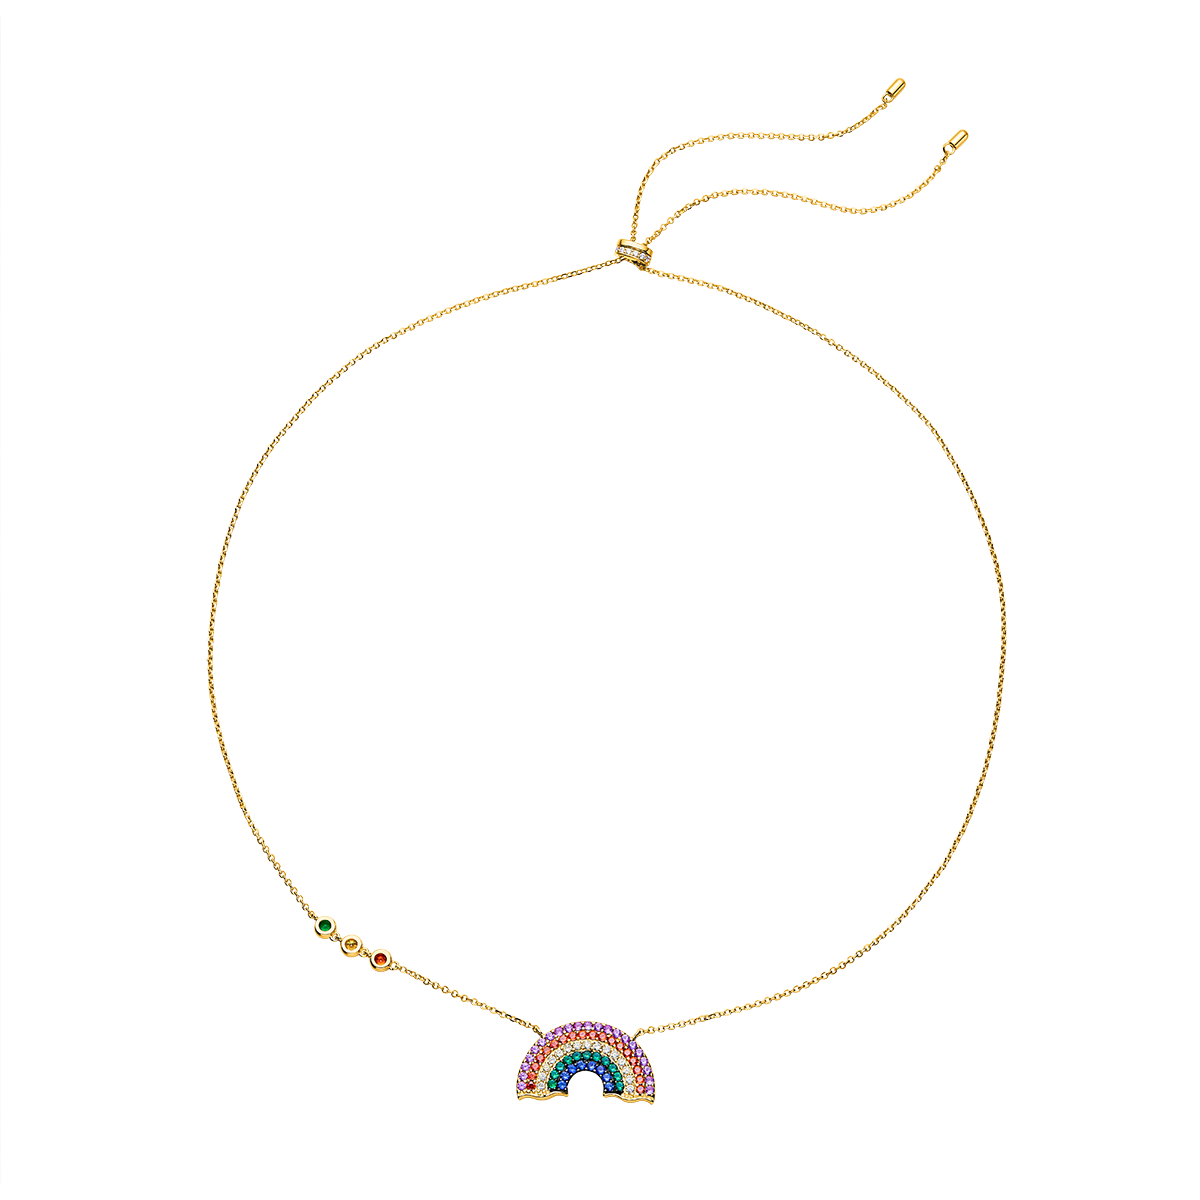 Rosegold Love Wins 2024 Watch with Rainbow Pendant